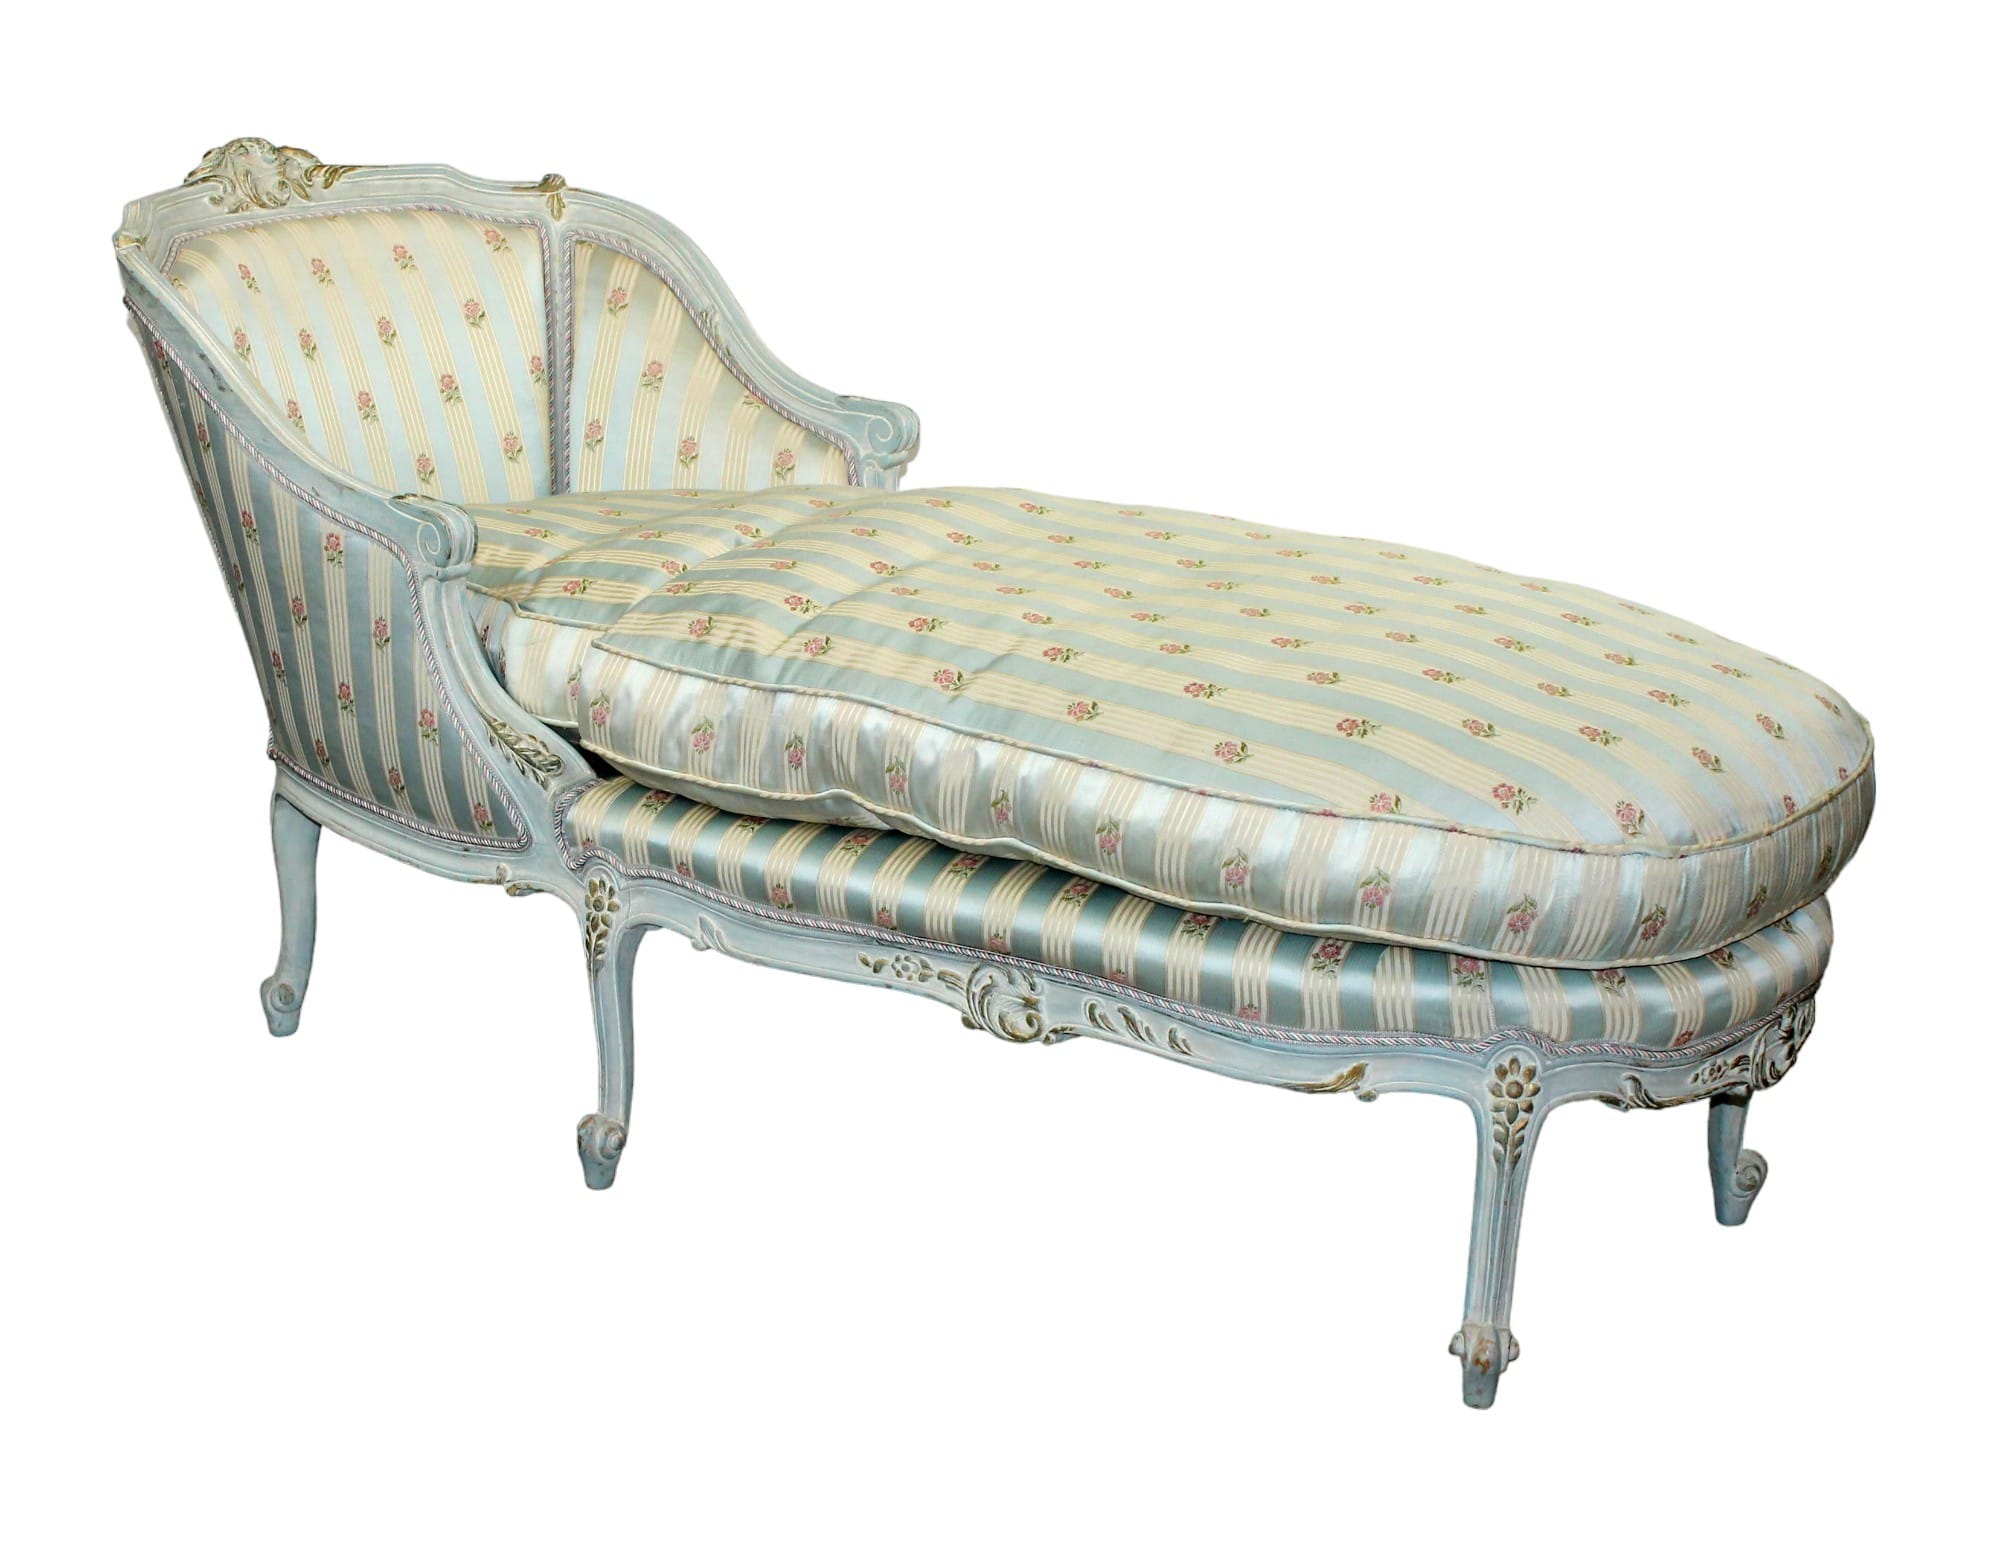 French Louis XV chaise lounge